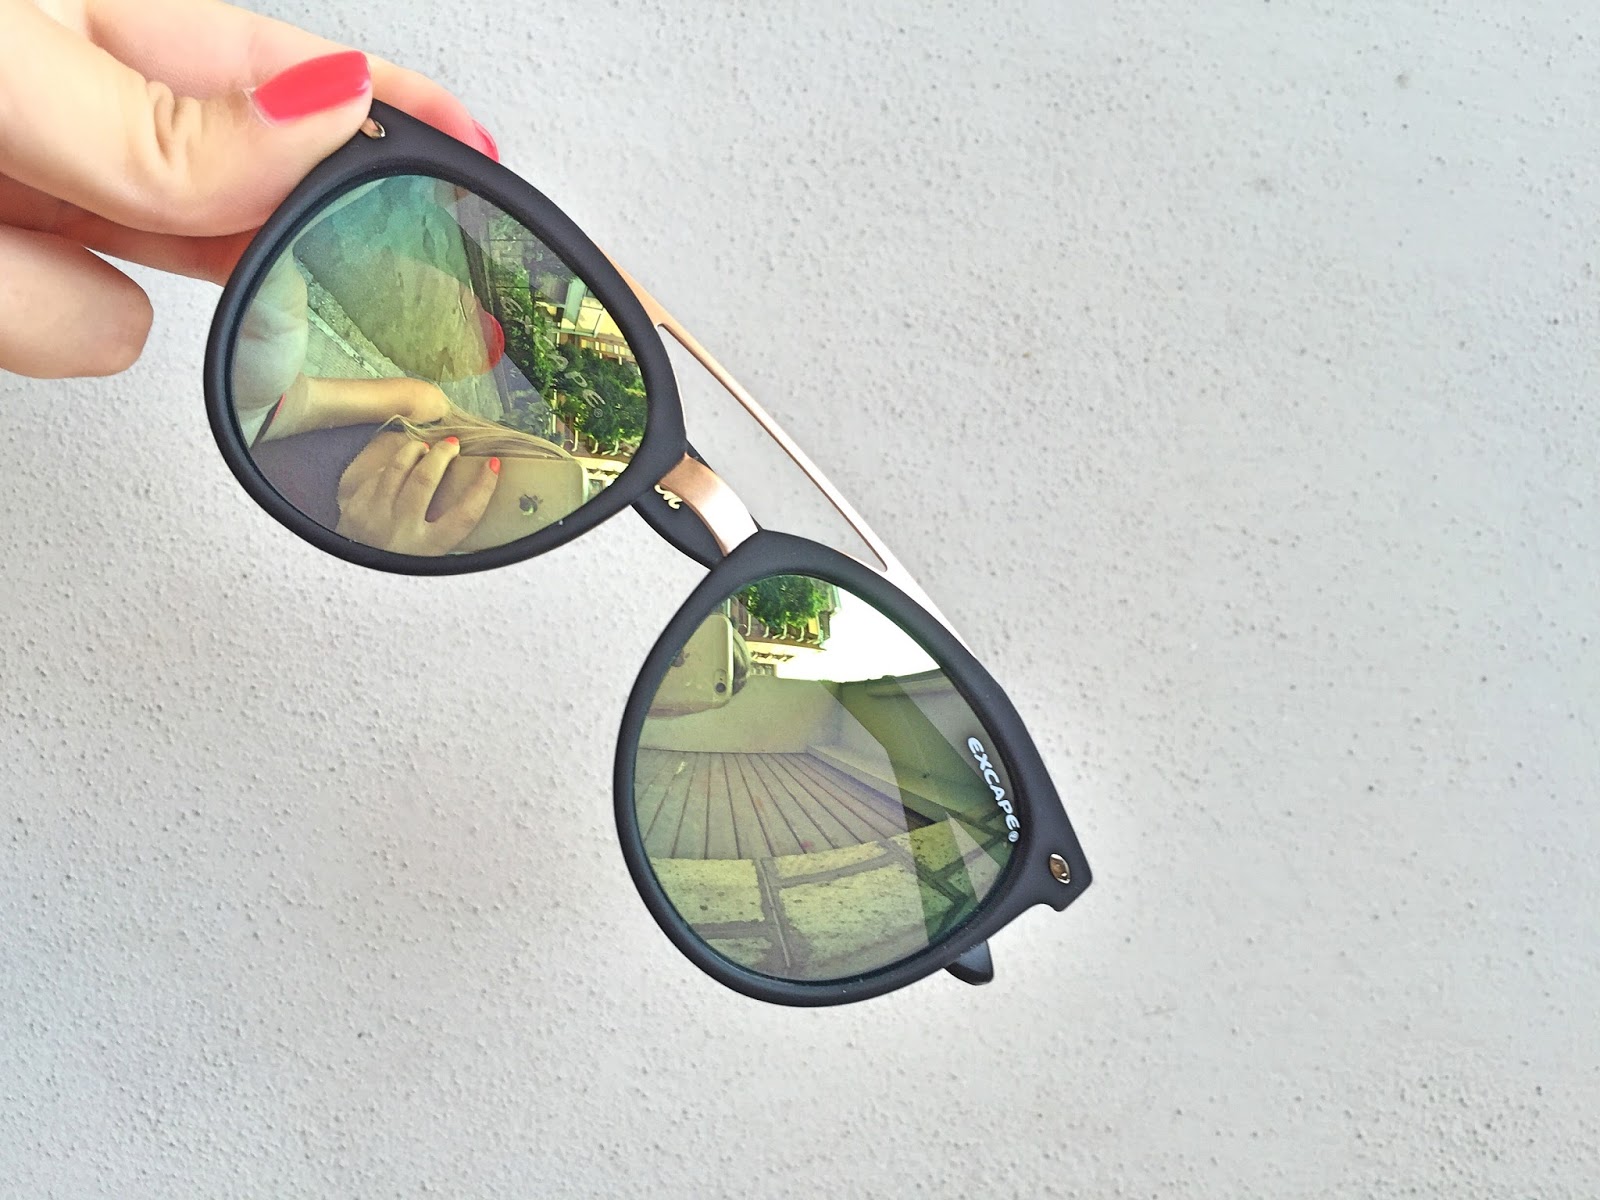 Excape Sunglasses || The new in